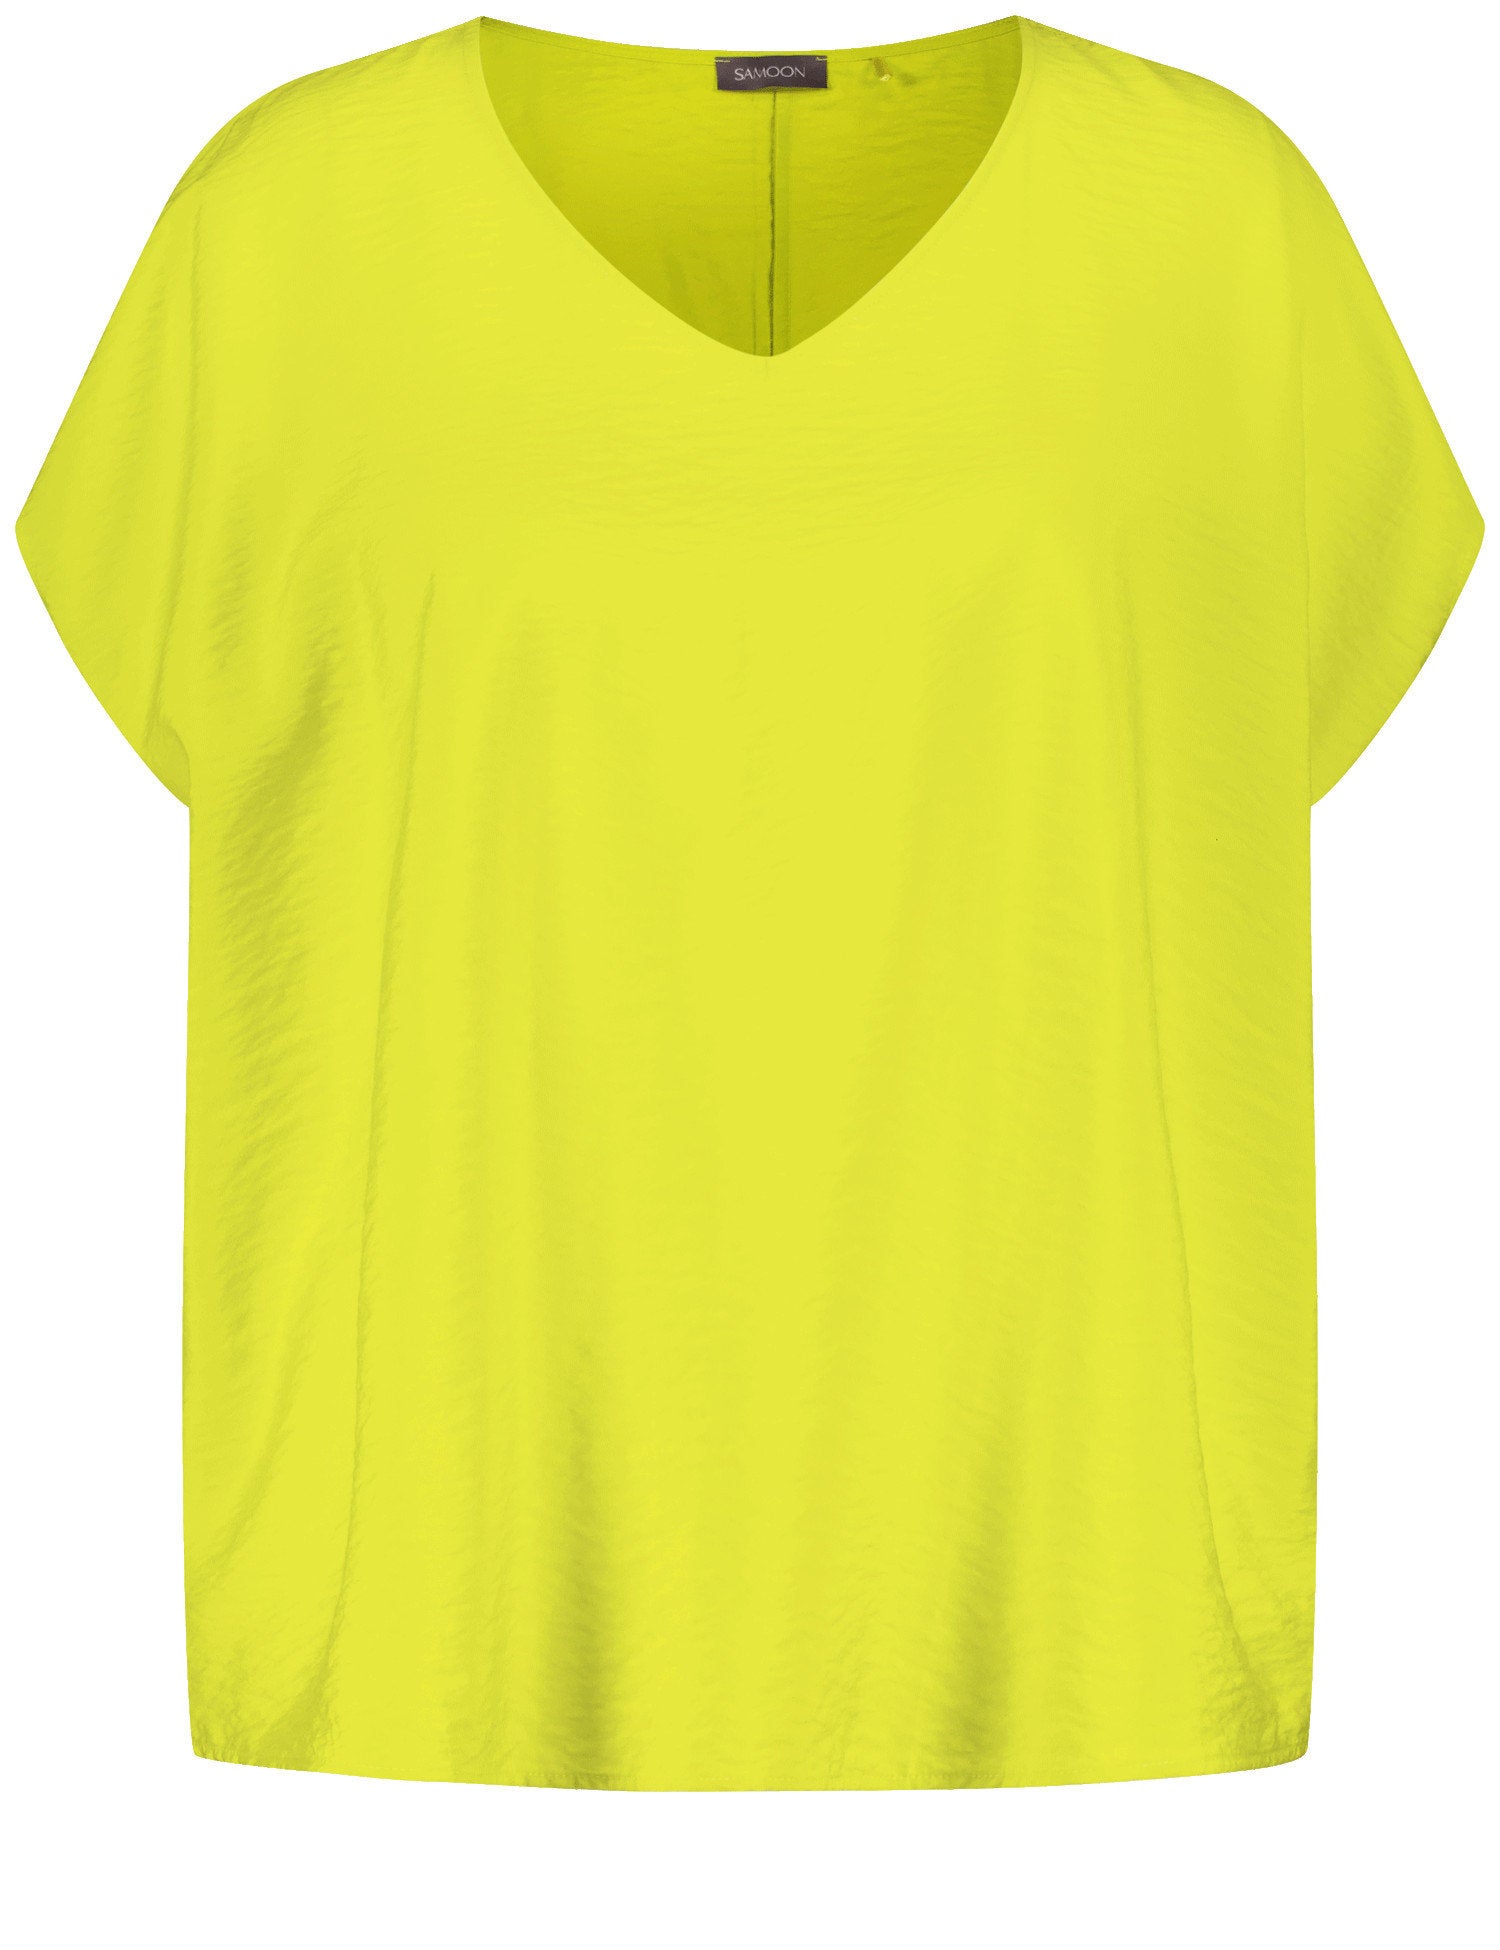 Blouse Top With A Subtle Shimmer_460040-21052_5600_07